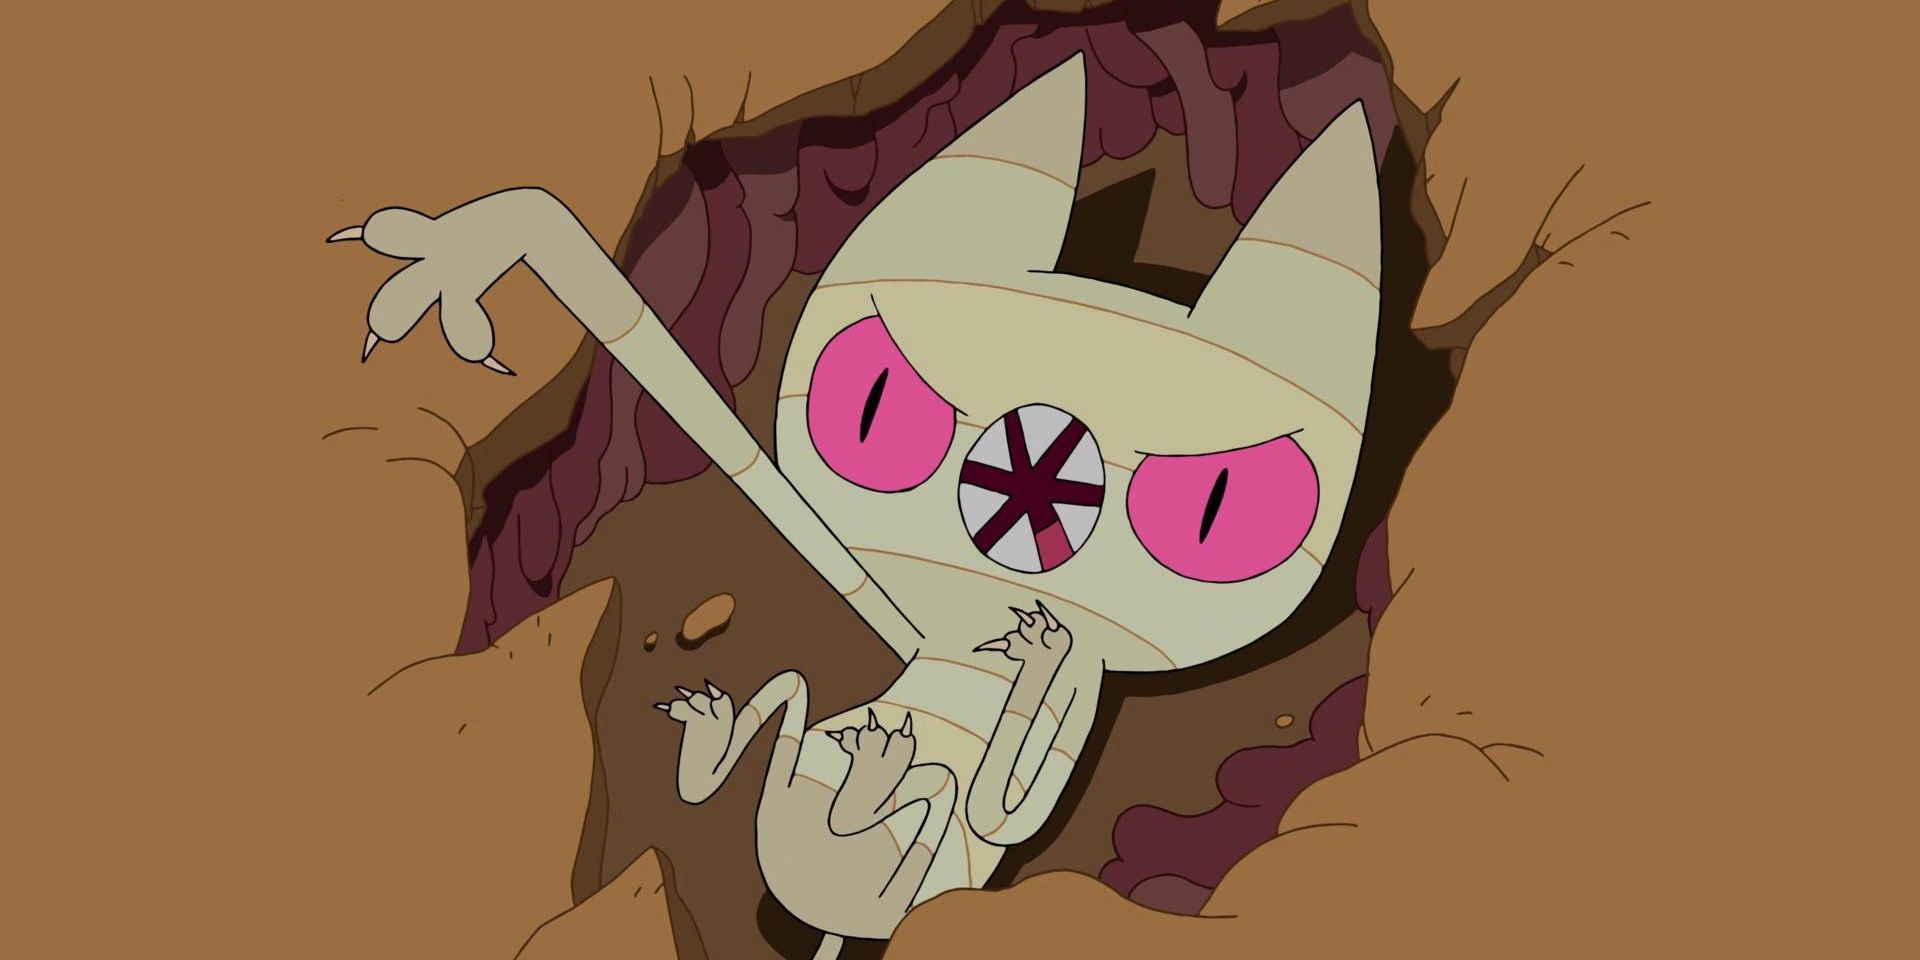 Me Mow Hiding in a crack in the ground in Adventure Time.